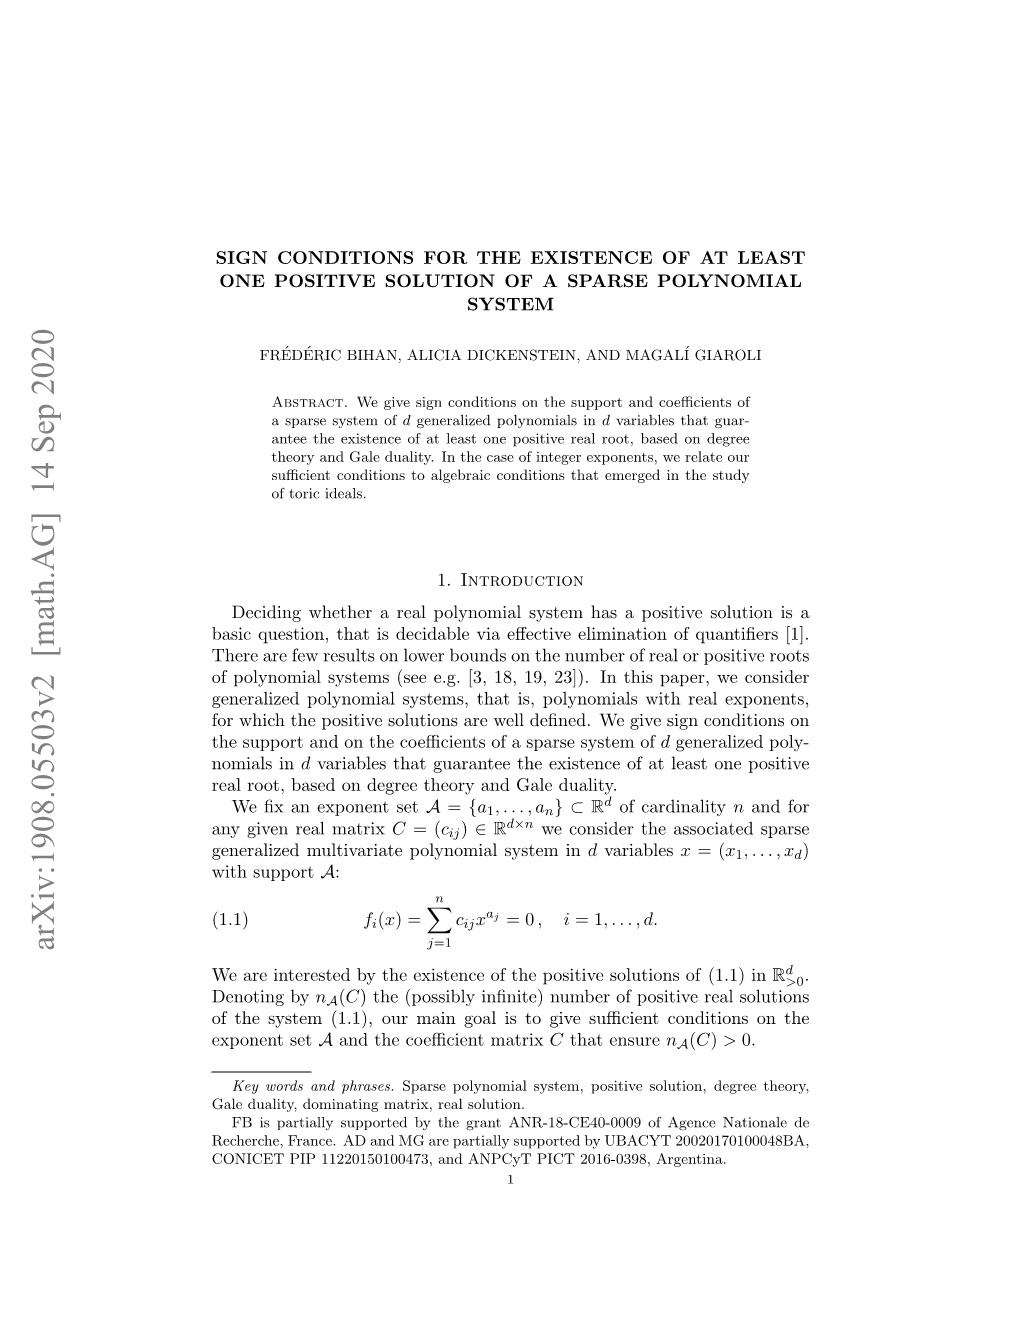 Arxiv:1908.05503V2 [Math.AG] 14 Sep 2020 D We Are Interested by the Existence of the Positive Solutions of (1.1) in R>0